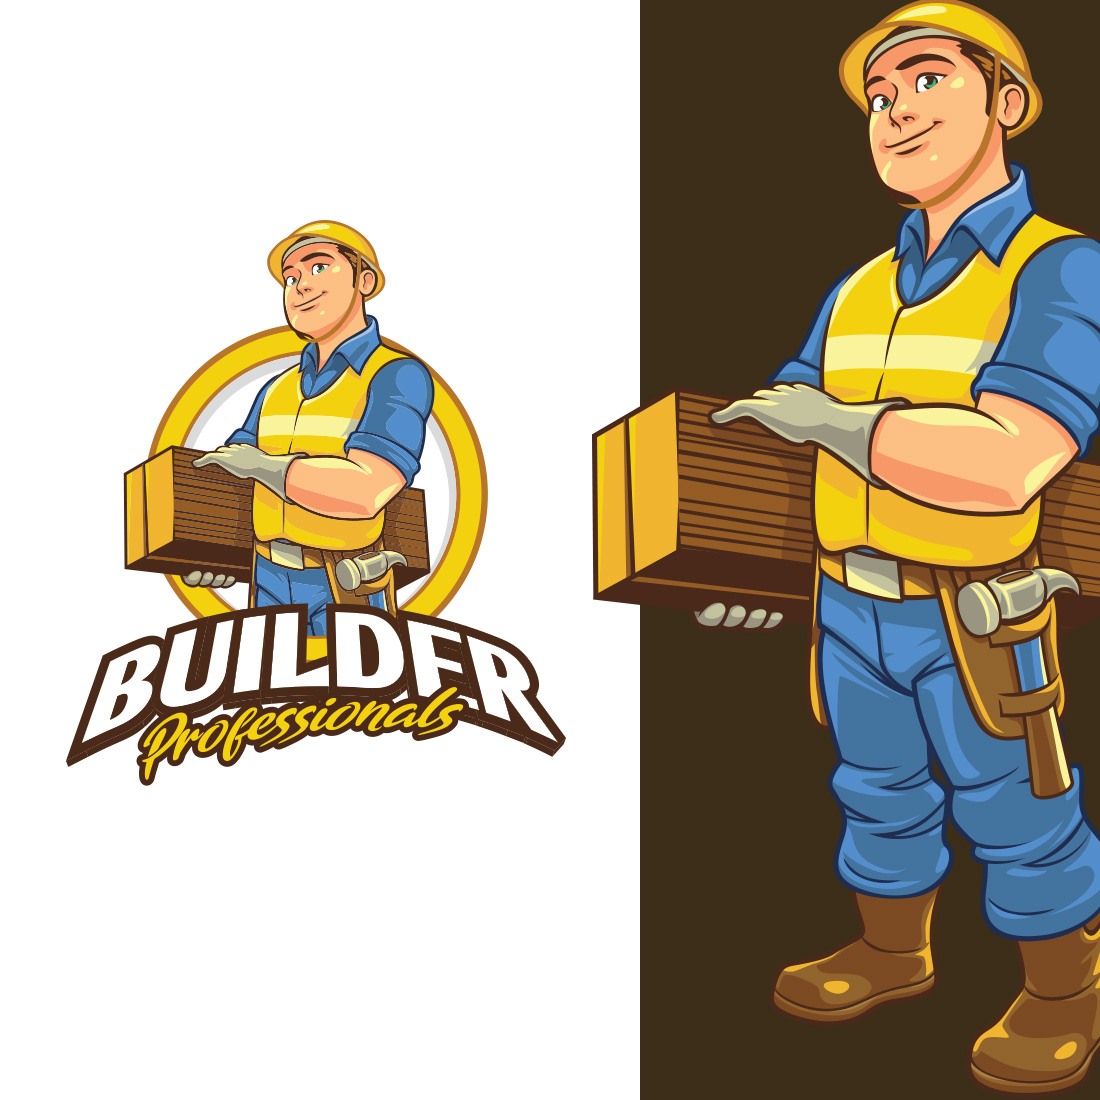 Builder Profesional Character Mascot Logo cover image.